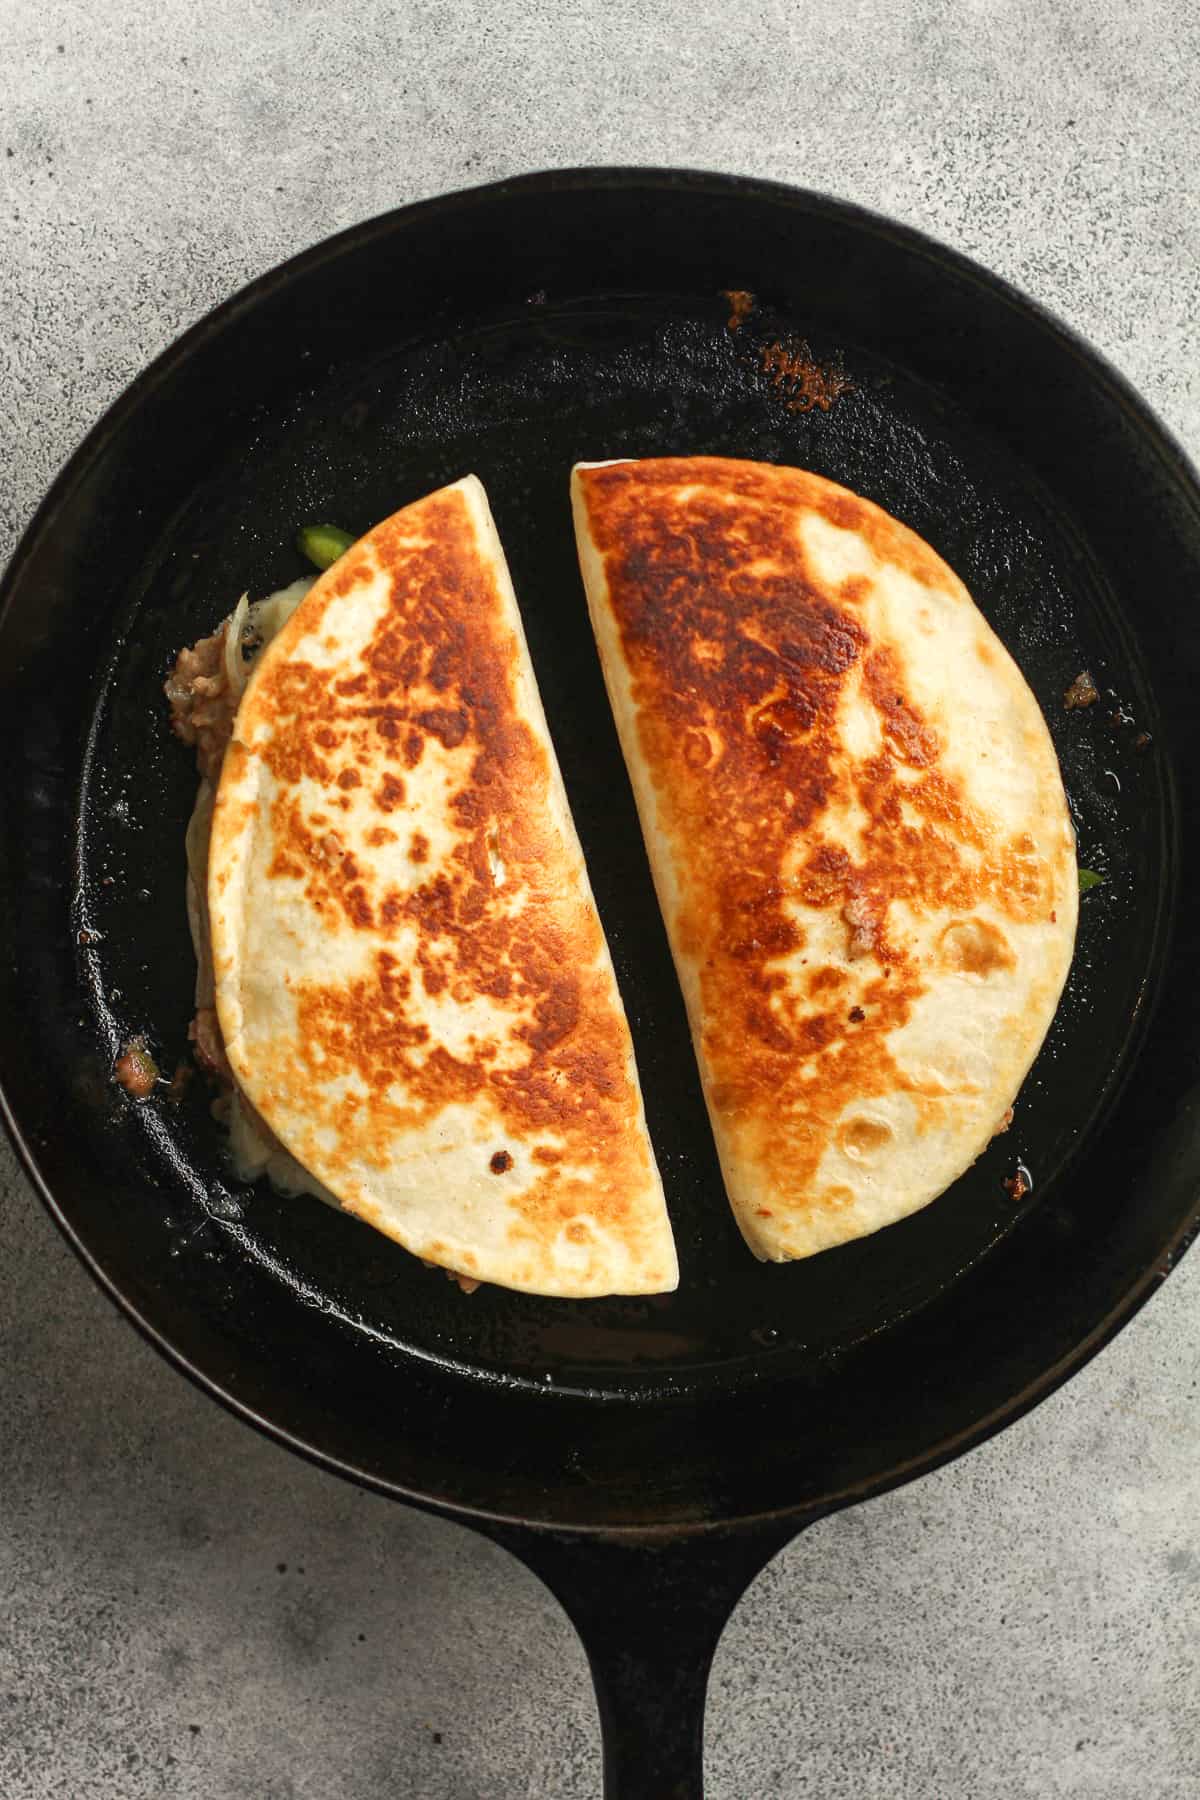 A skillet of two browned quesadillas.